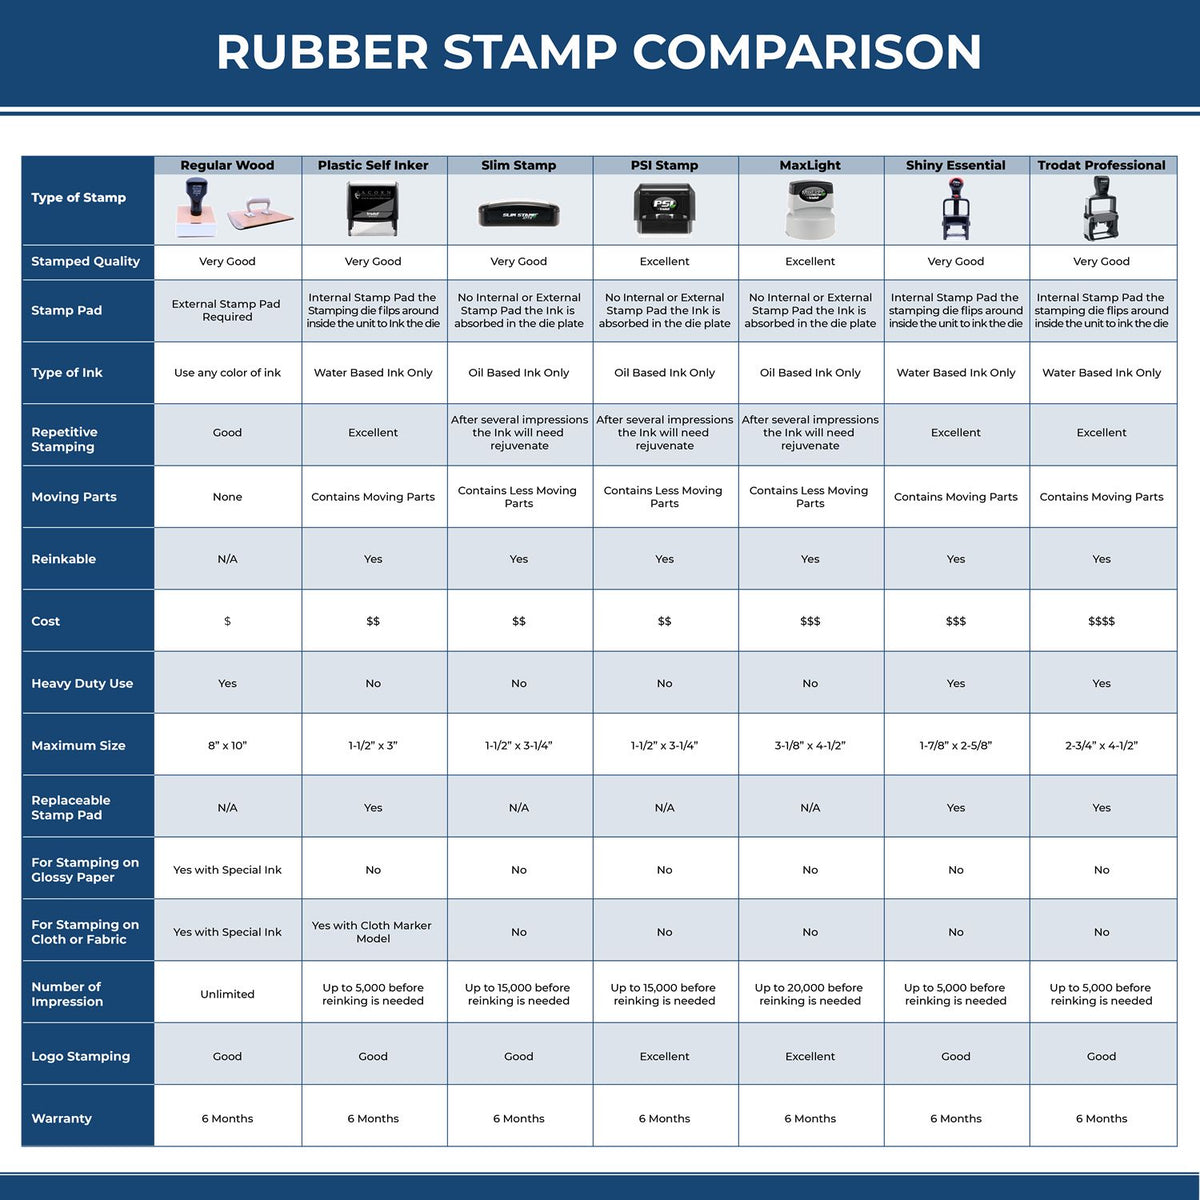 Large Self-Inking Amortizado Stamp 5538S Rubber Stamp Comparison